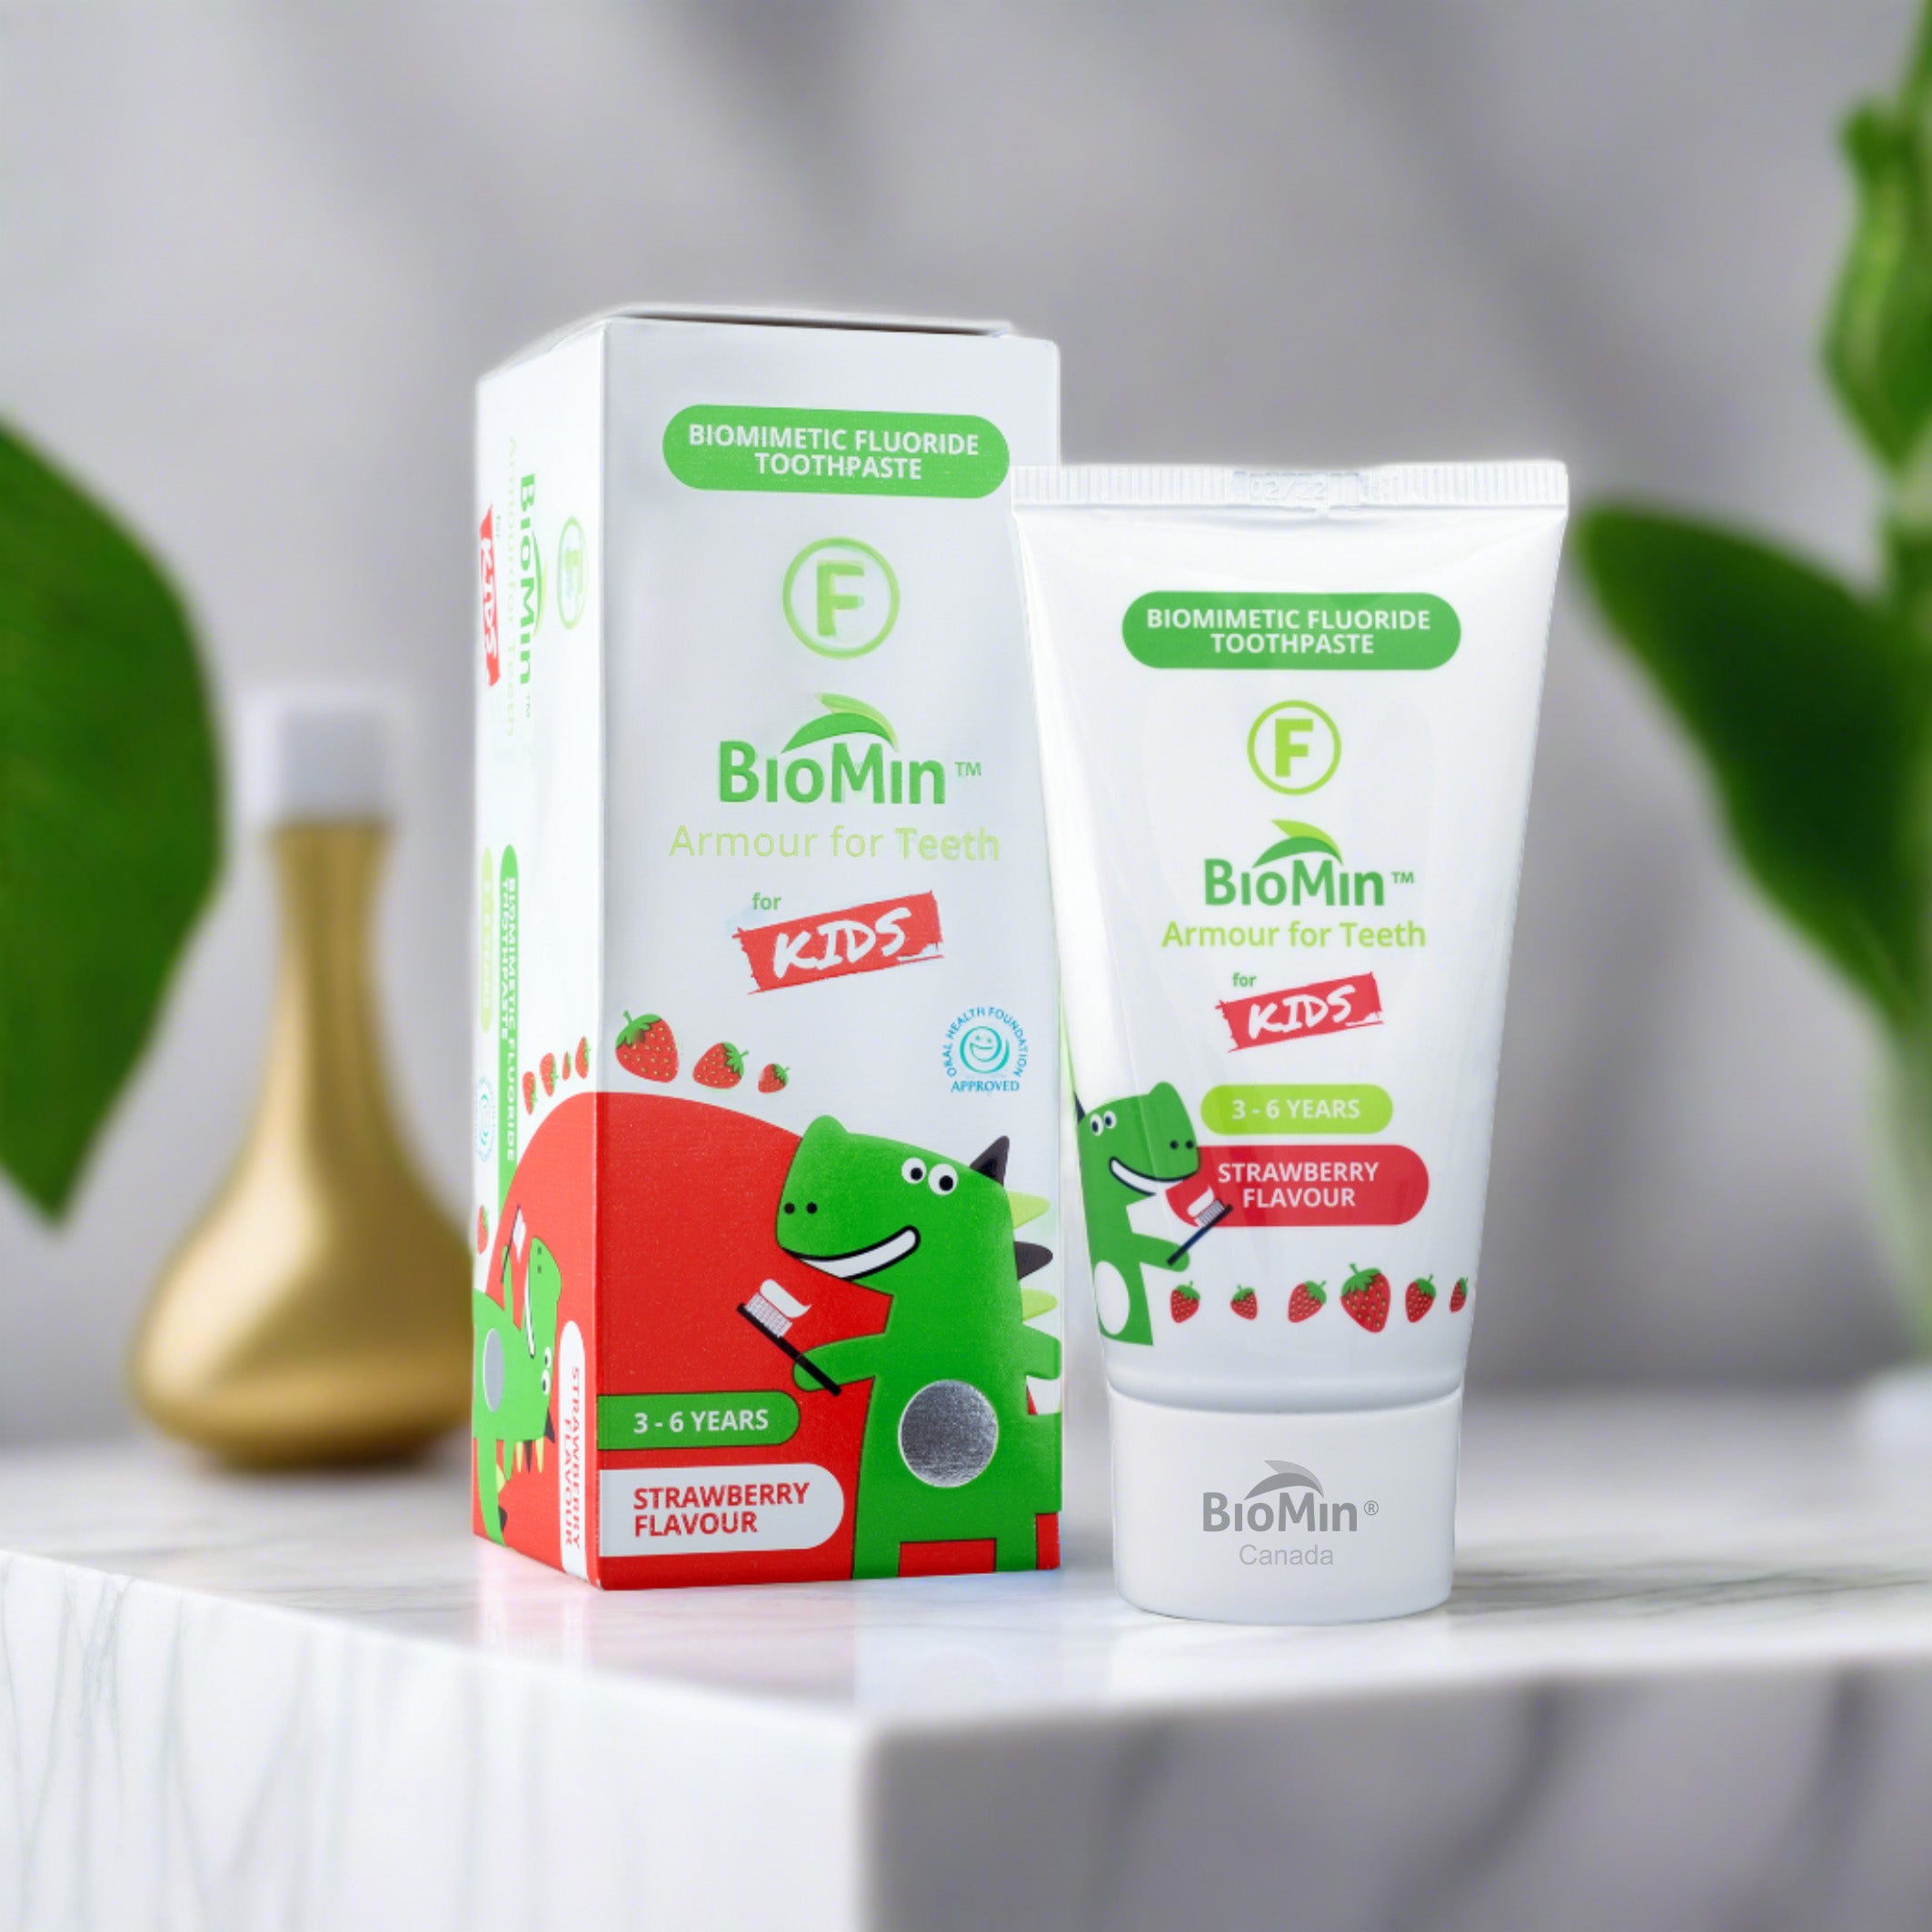 BioMin F for Kids Toothpaste